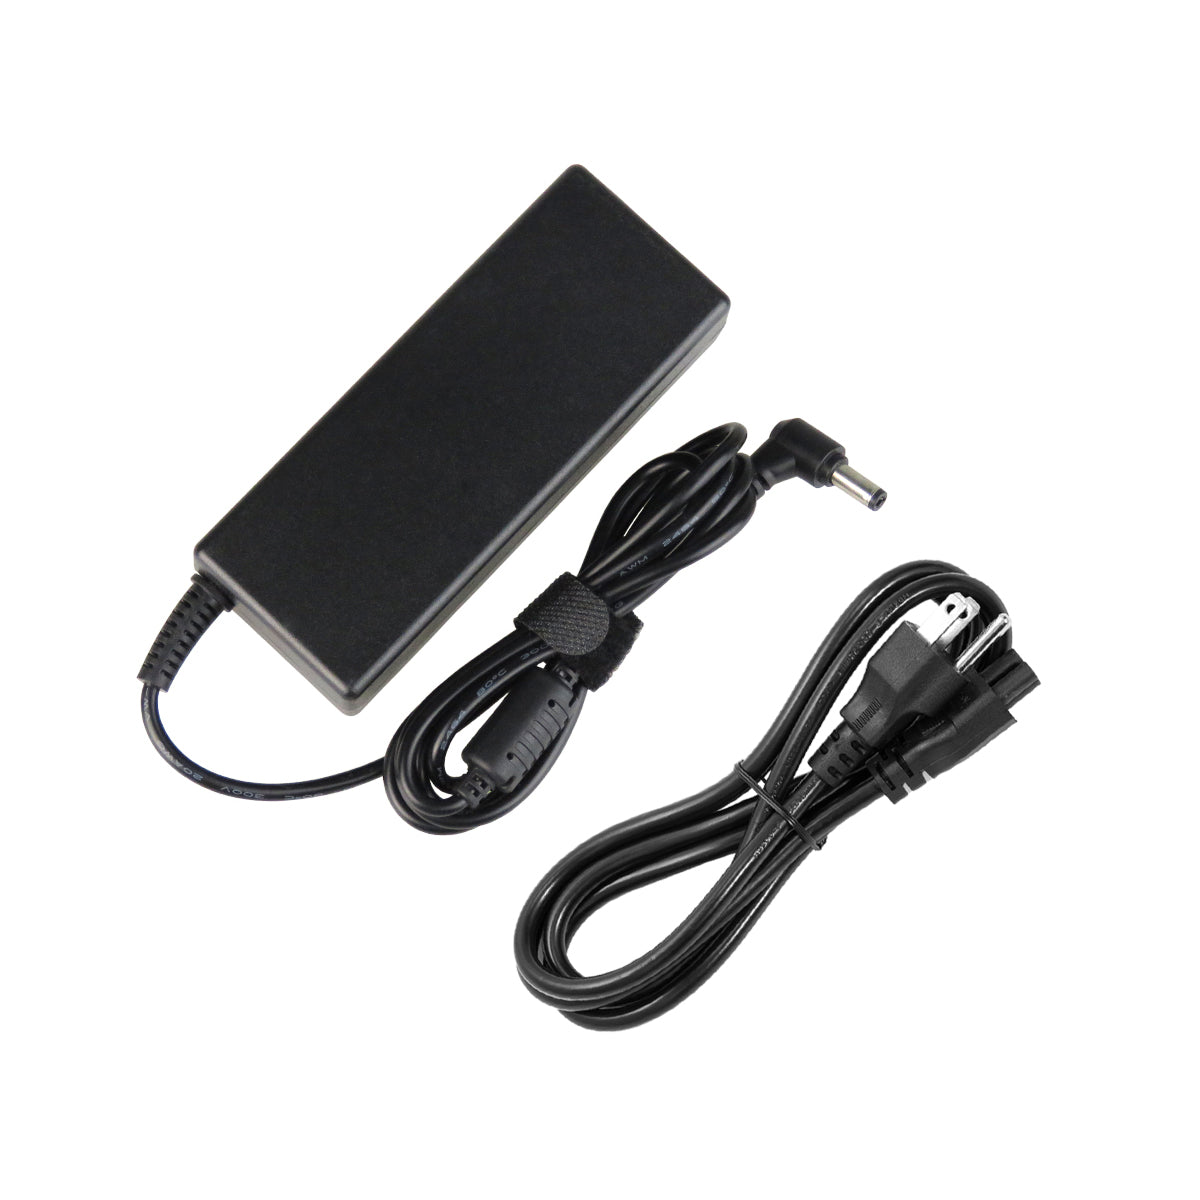 AC Adapter Charger for Gateway S-7710 Notebook.